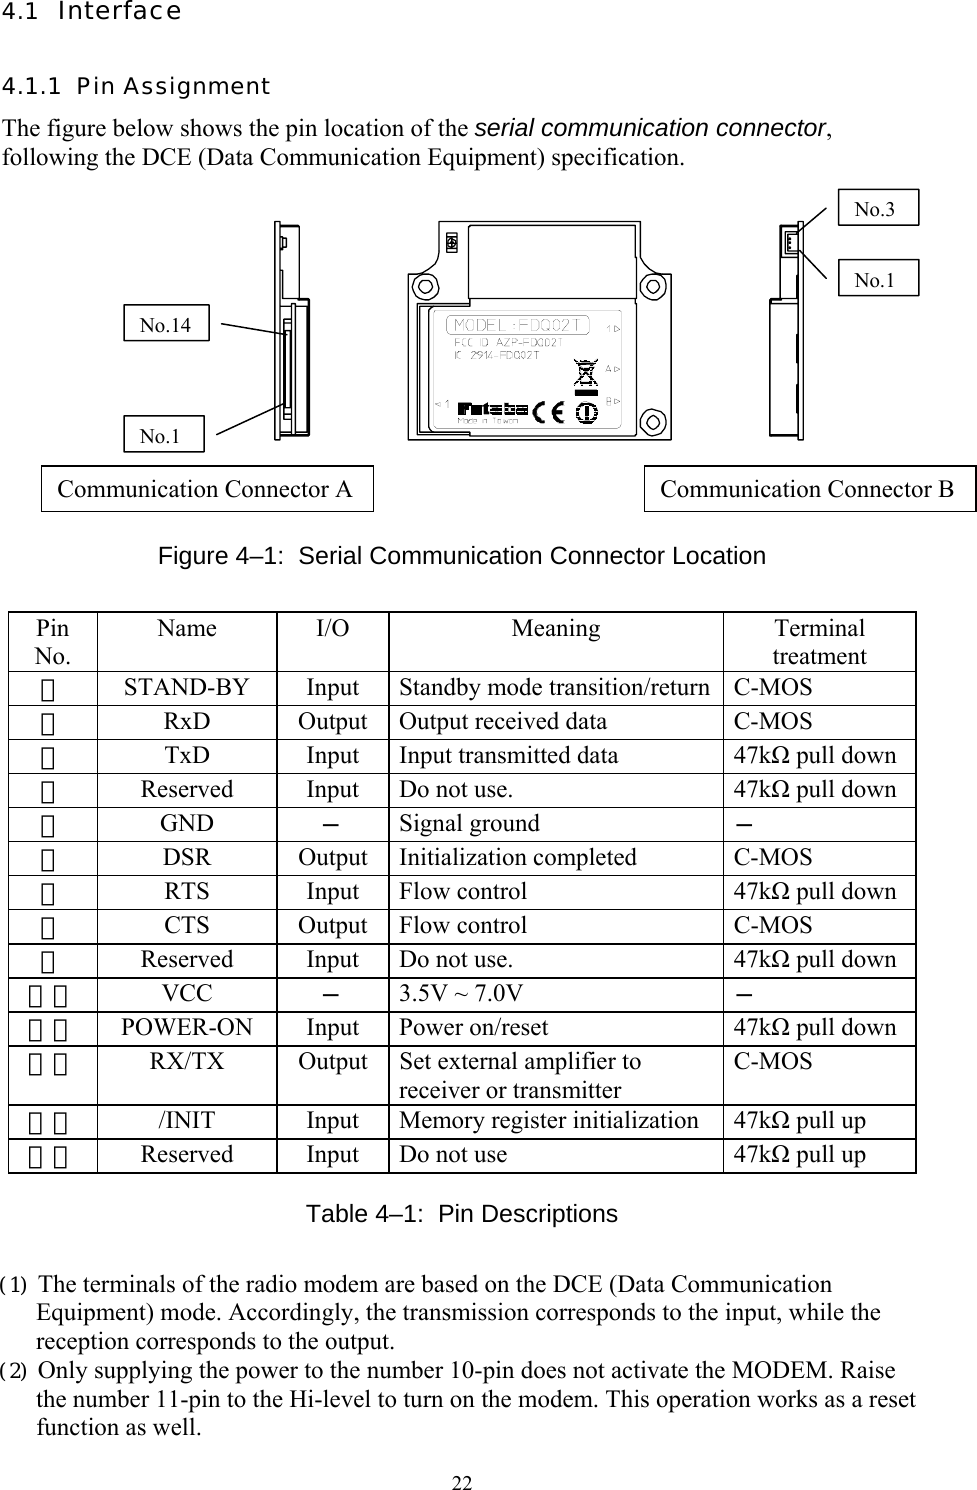  22 4.1  Interface 4.1.1  Pin Assignment The figure below shows the pin location of the serial communication connector, following the DCE (Data Communication Equipment) specification.               Figure 4–1:  Serial Communication Connector Location Pin  No. Name I/O  Meaning  Terminal treatment １ STAND-BY Input Standby mode transition/return C-MOS ２ RxD  Output  Output received data  C-MOS ３ TxD  Input  Input transmitted data  47kΩ pull down ４ Reserved  Input  Do not use.  47kΩ pull down５ GND  − Signal ground  − ６ DSR Output Initialization completed  C-MOS ７ RTS Input Flow control  47kΩ pull down８ CTS Output Flow control  C-MOS ９ Reserved  Input  Do not use.  47kΩ pull down１０ VCC  − 3.5V ~ 7.0V  − １１ POWER-ON Input Power on/reset  47kΩ pull down１２ RX/TX  Output  Set external amplifier to receiver or transmitter C-MOS １３ /INIT  Input  Memory register initialization  47kΩ pull up １４ Reserved  Input  Do not use  47kΩ pull up Table 4–1:  Pin Descriptions (1) The terminals of the radio modem are based on the DCE (Data Communication Equipment) mode. Accordingly, the transmission corresponds to the input, while the reception corresponds to the output. (2) Only supplying the power to the number 10-pin does not activate the MODEM. Raise the number 11-pin to the Hi-level to turn on the modem. This operation works as a reset function as well. No.1 No.14 No.1No.3Communication Connector A  Communication Connector B